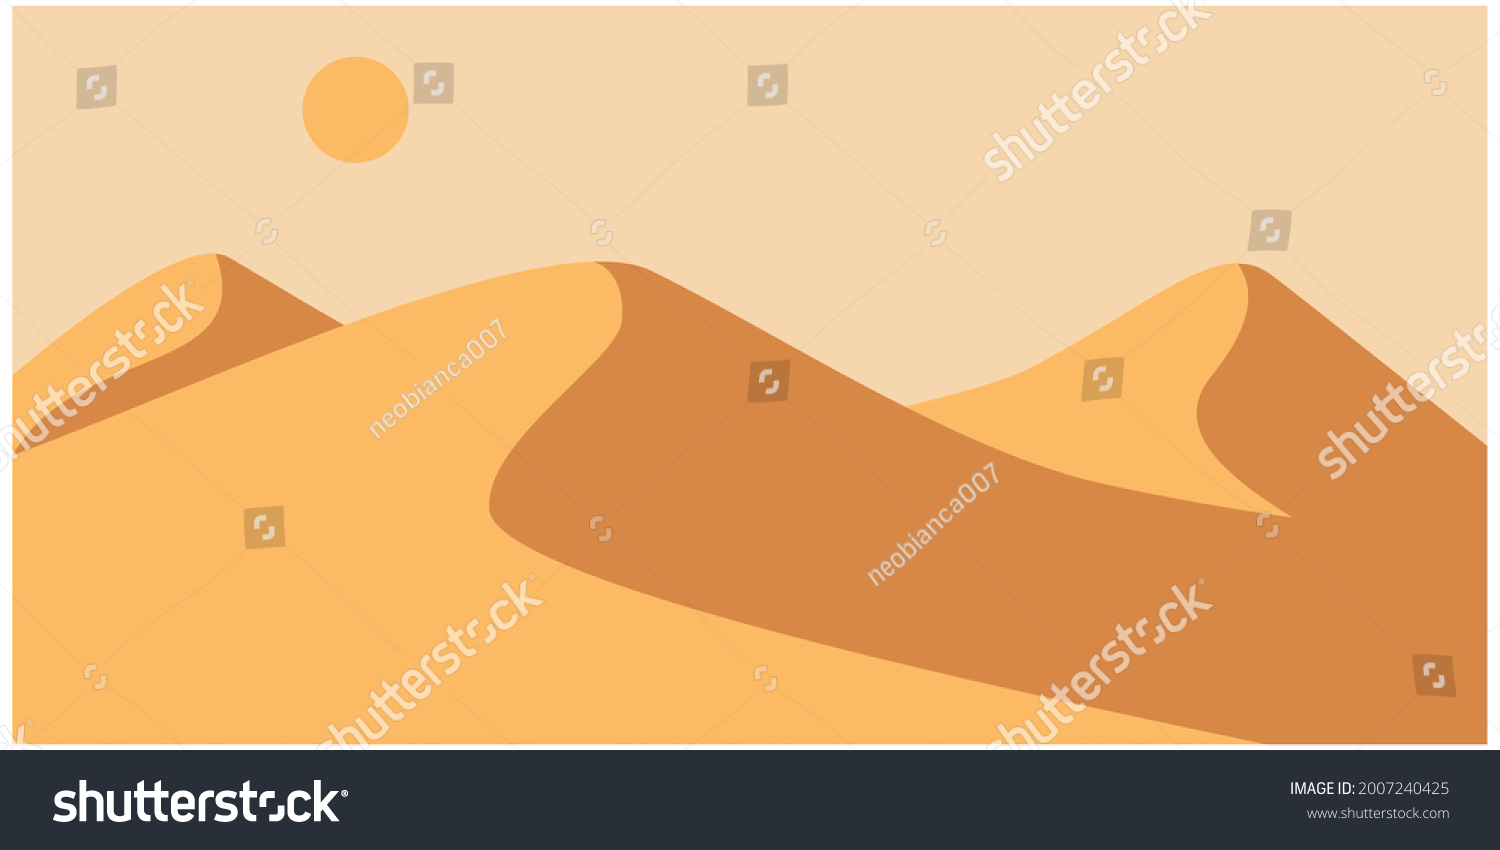 SVG of Desert landscape with a sun and sandy.Desert dunes background.Abstract vector background with dramatic desert dunes and sunset. svg